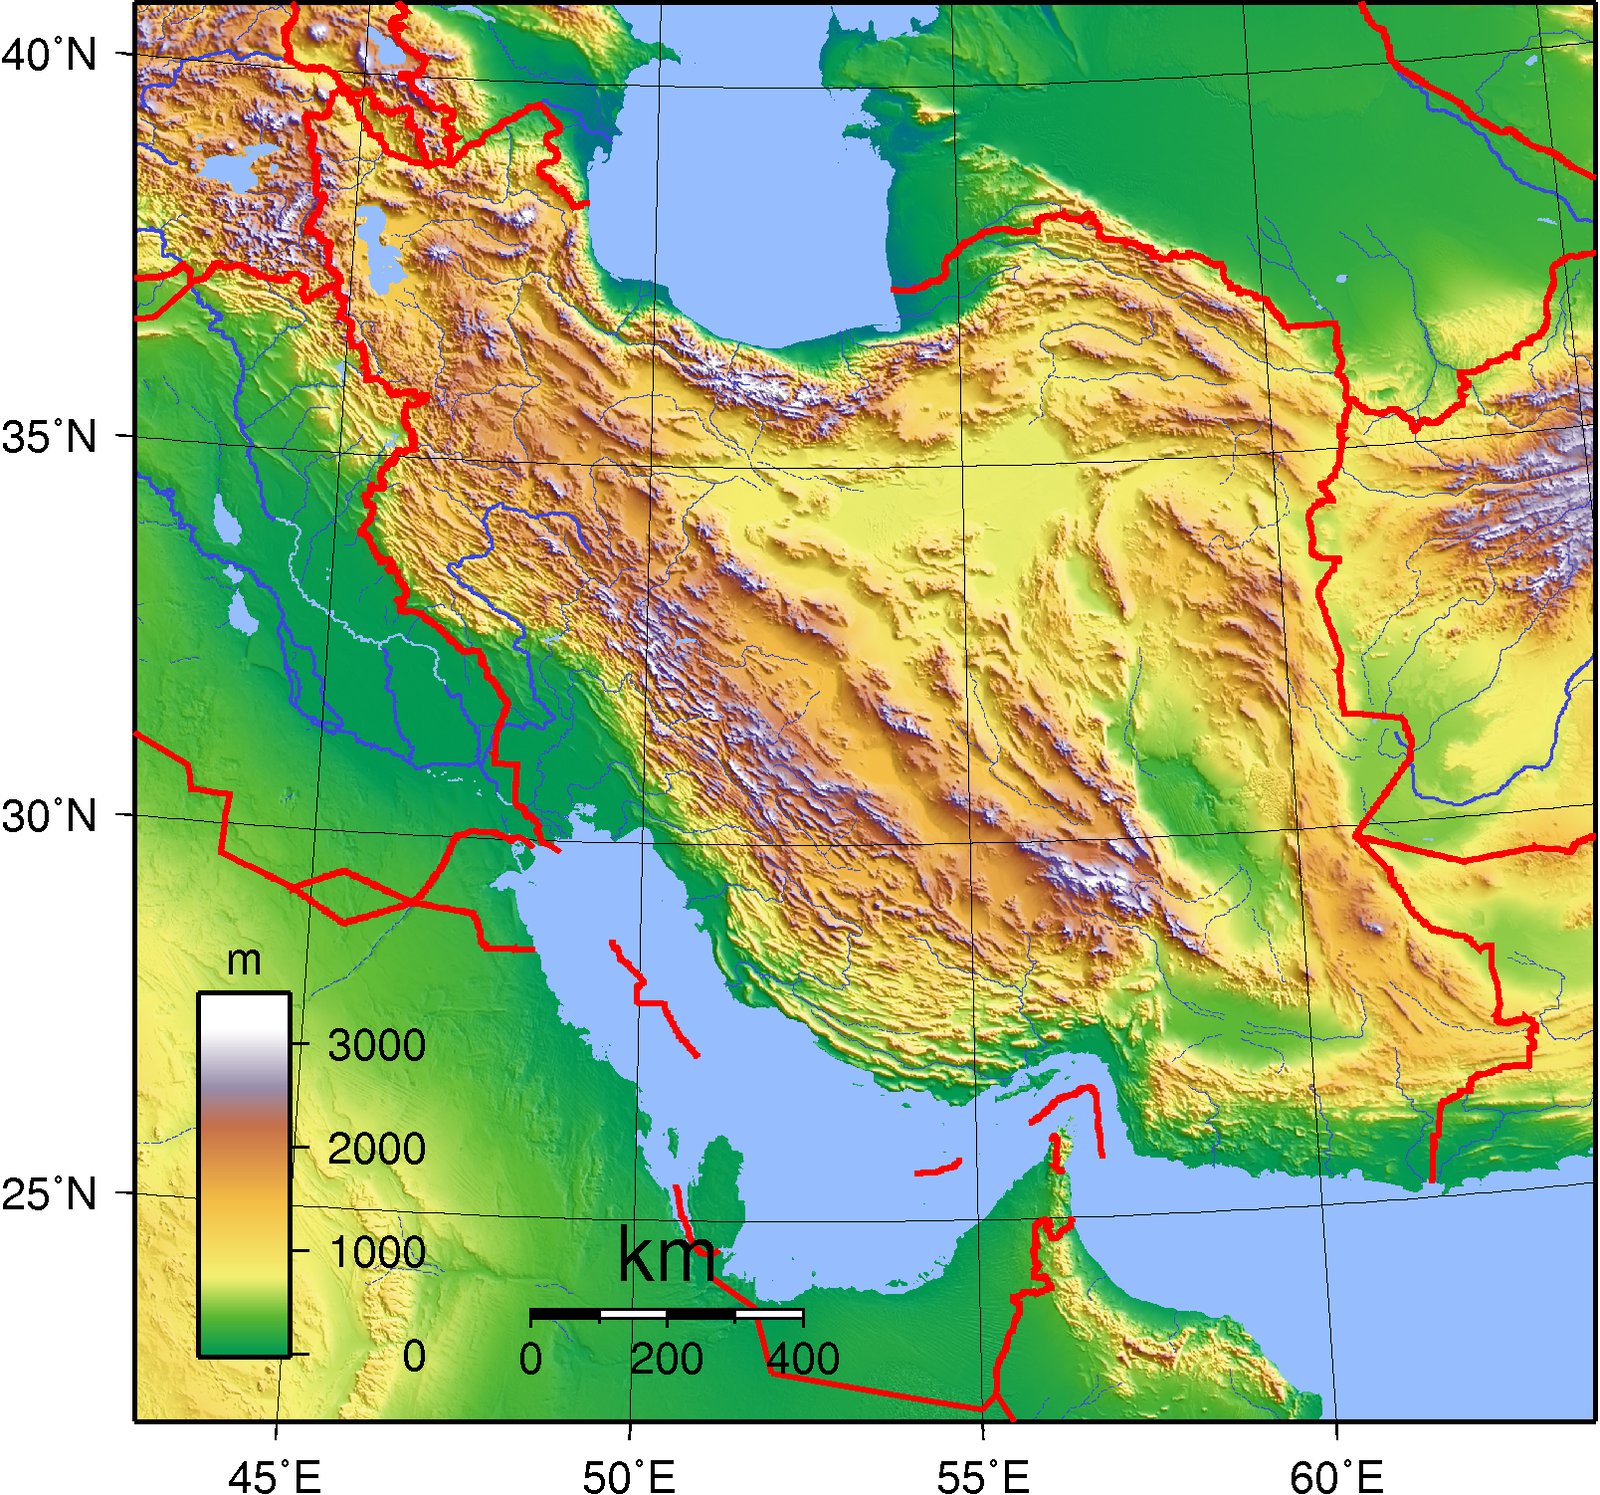 Iran_Topography.png